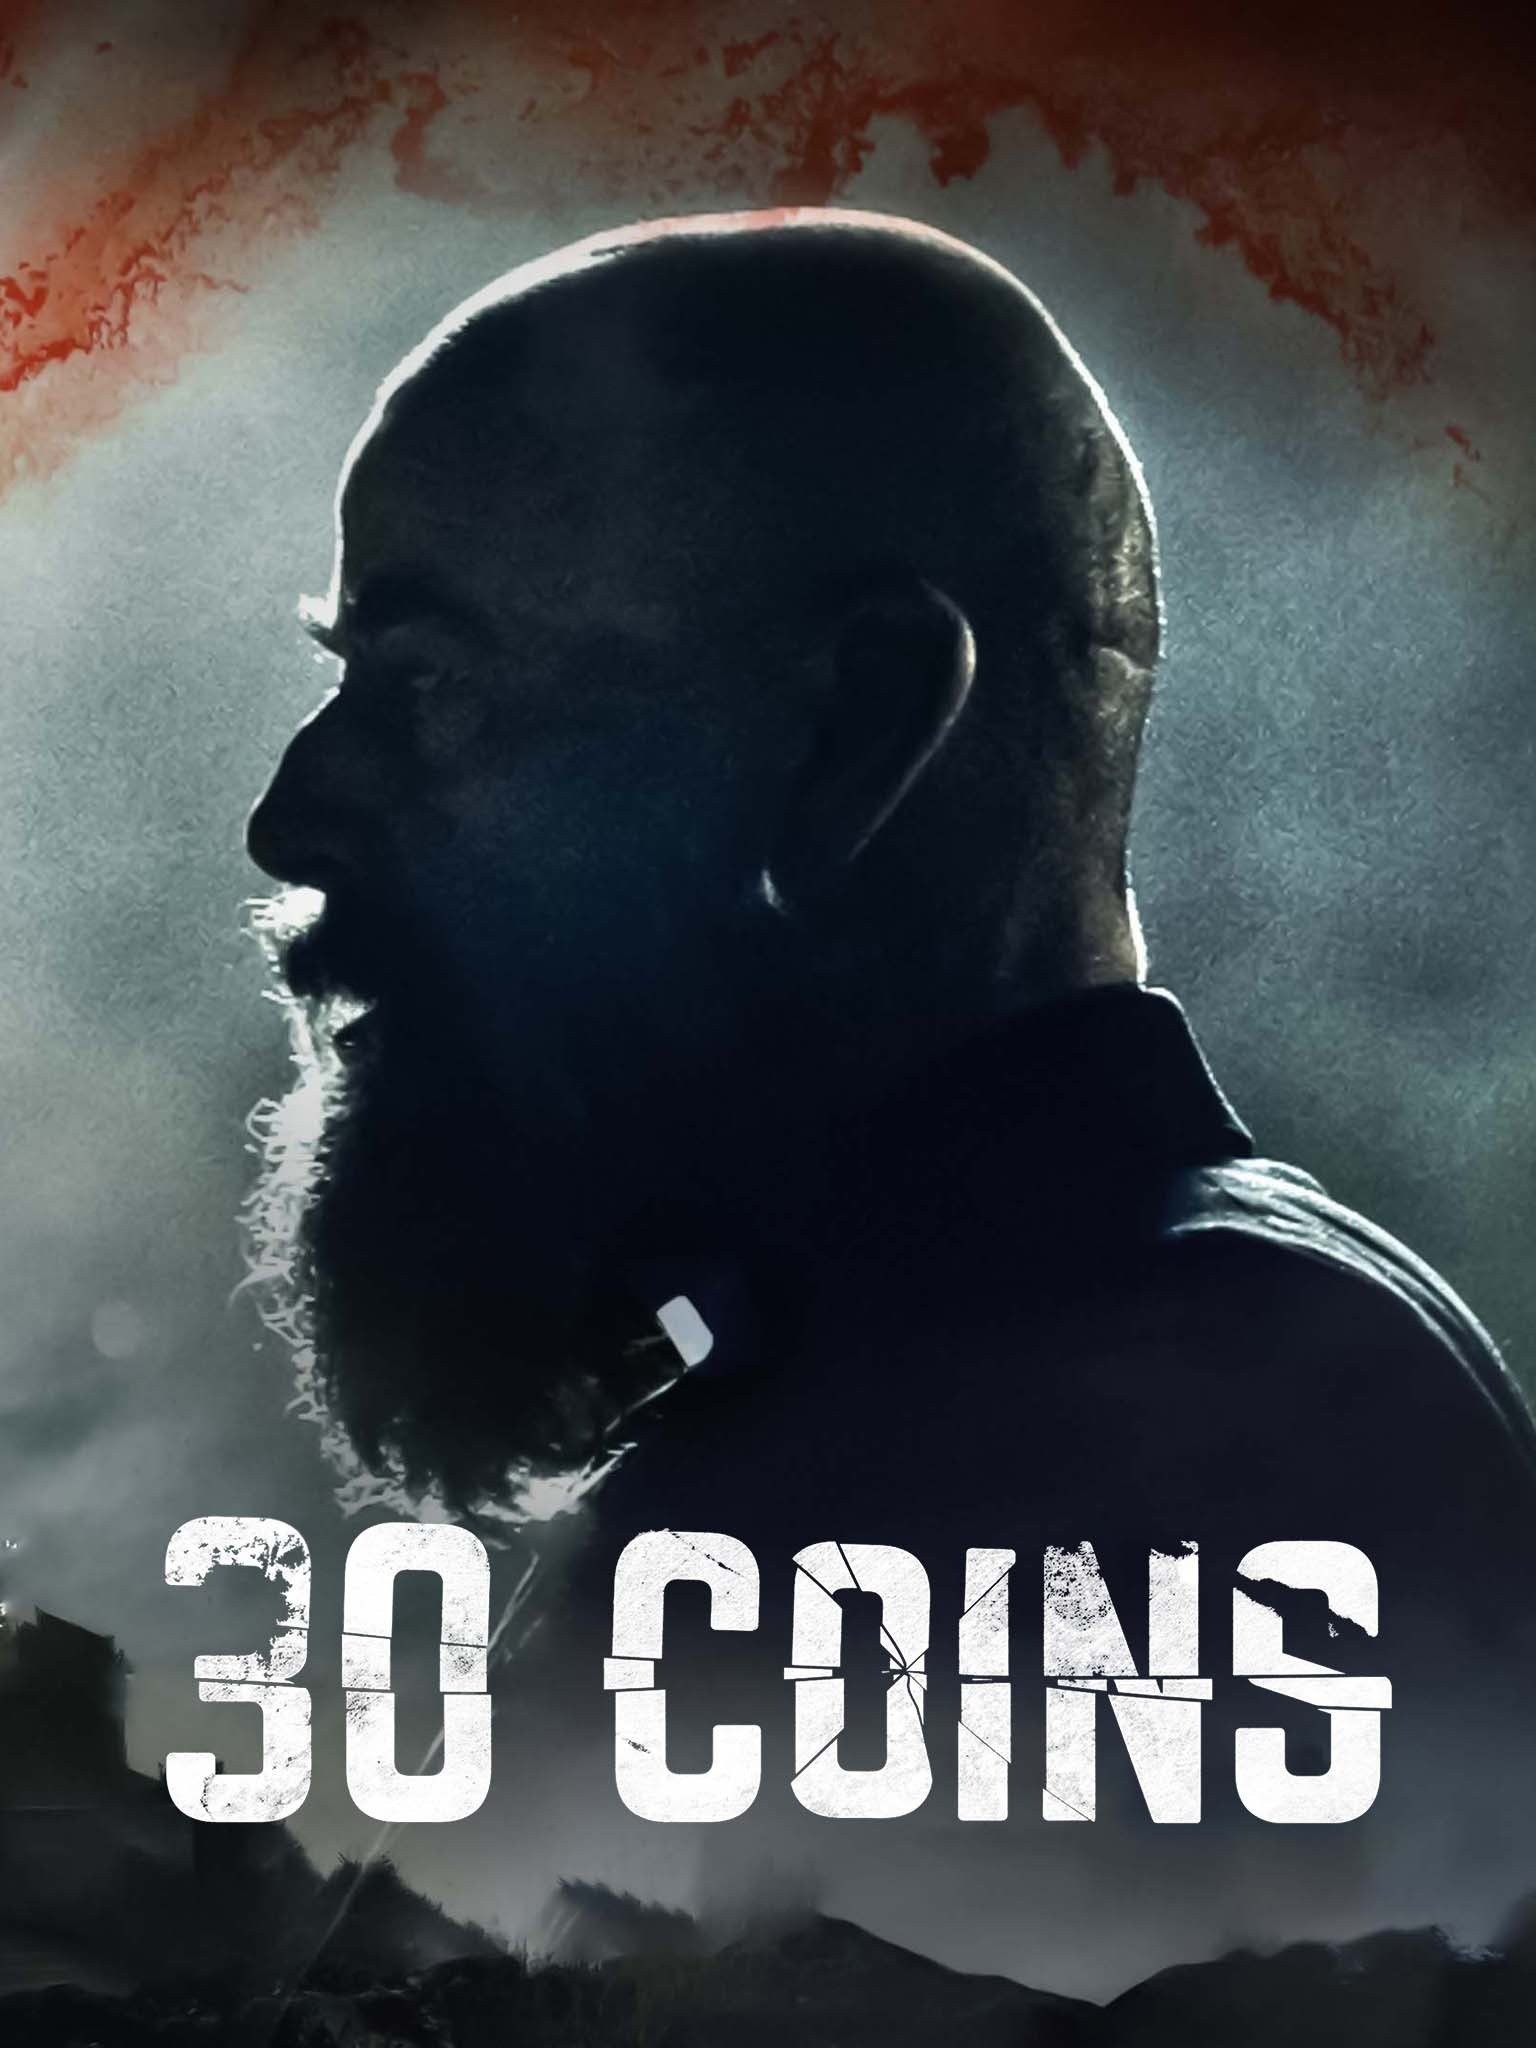 30 Coins - Rotten Tomatoes